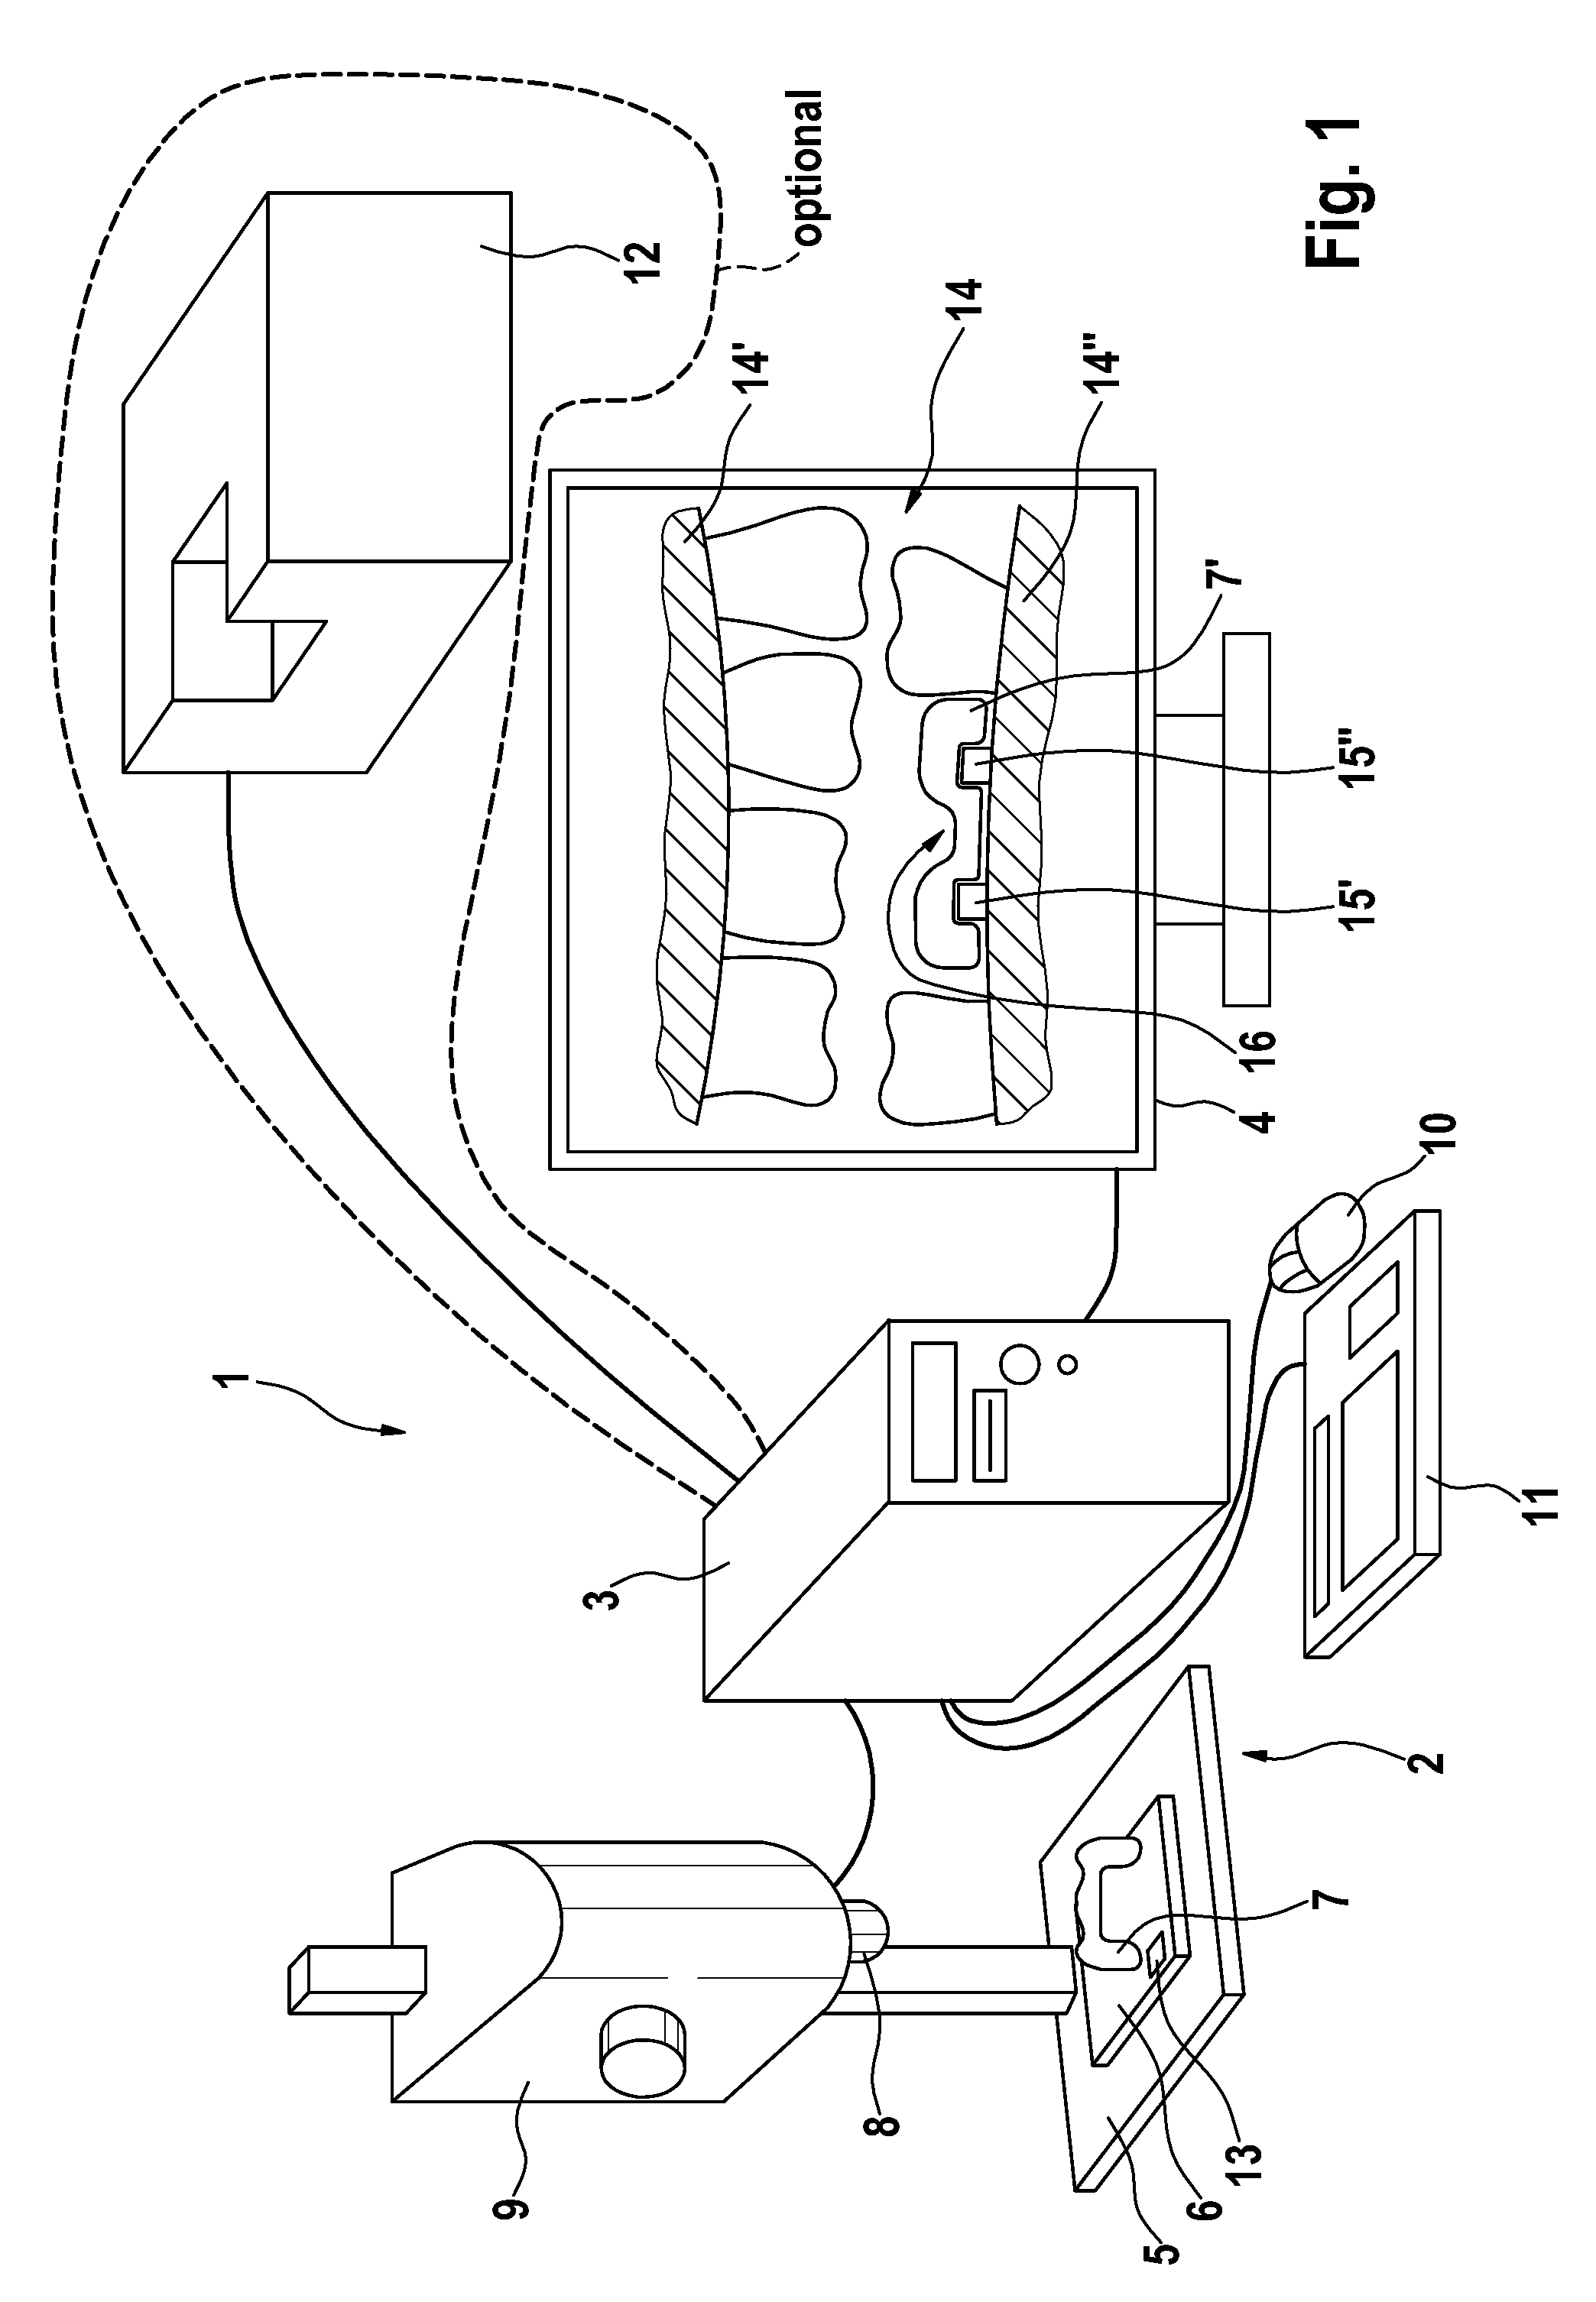 Method and device for producing dental prosthesis elements